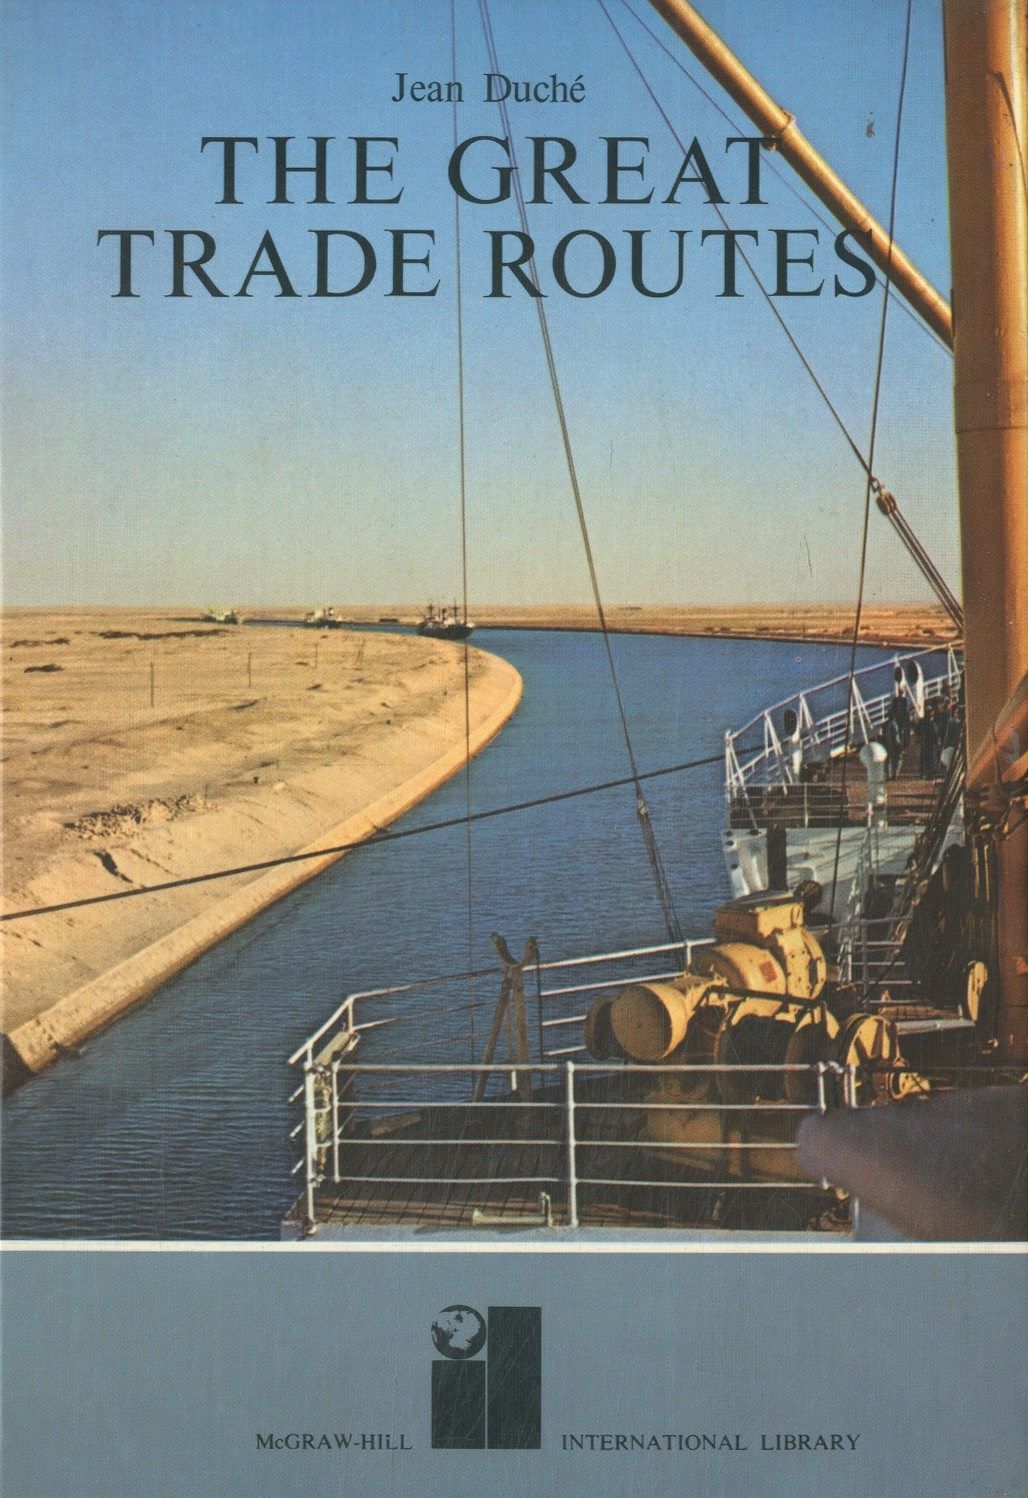 THE GREAT TRADE ROUTES